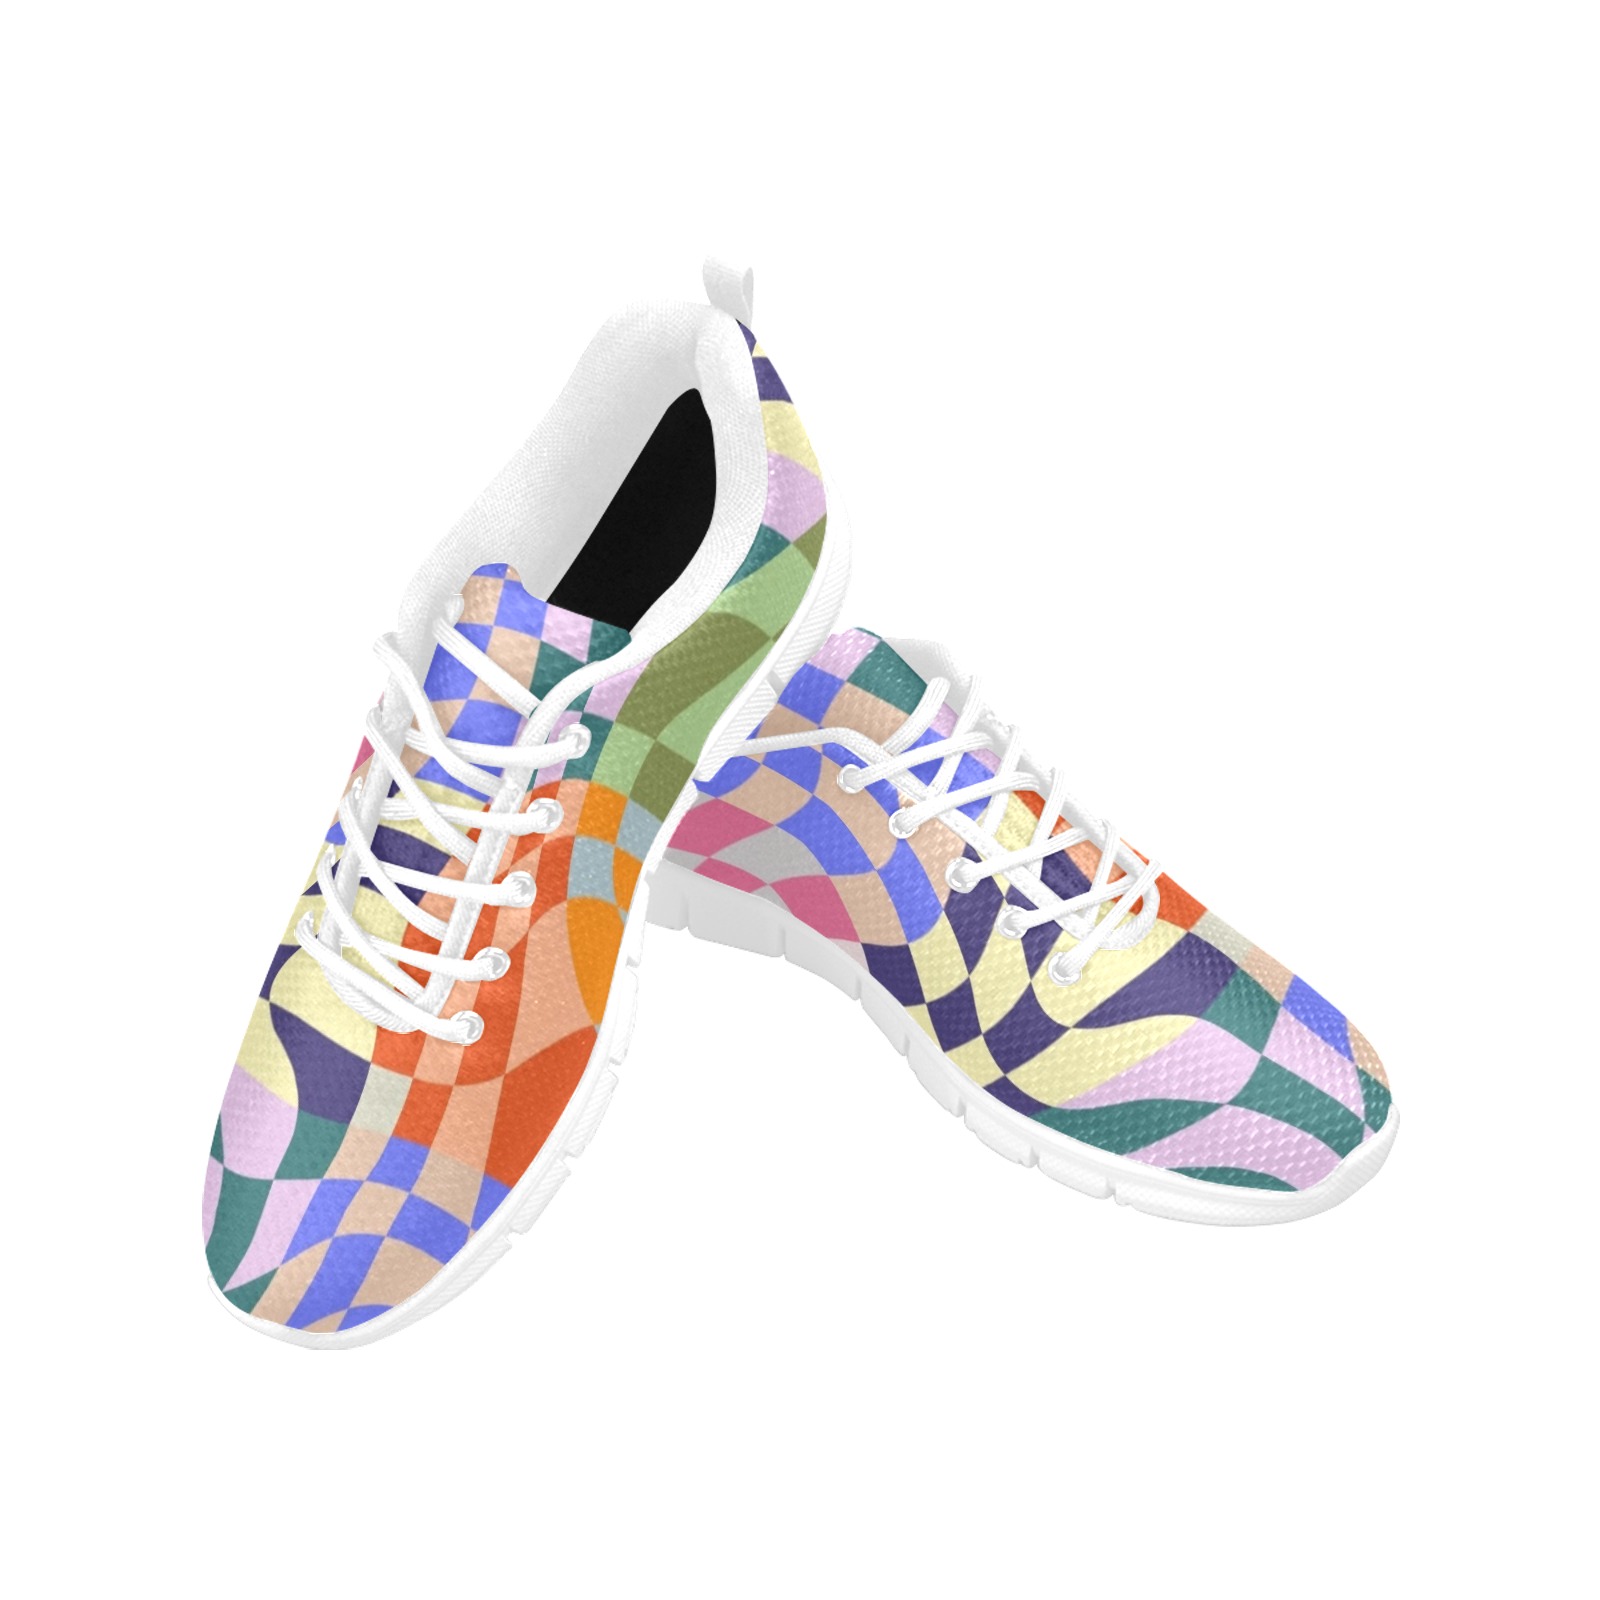 Wavy Checks - geometric abstract Women's Breathable Running Shoes (Model 055)